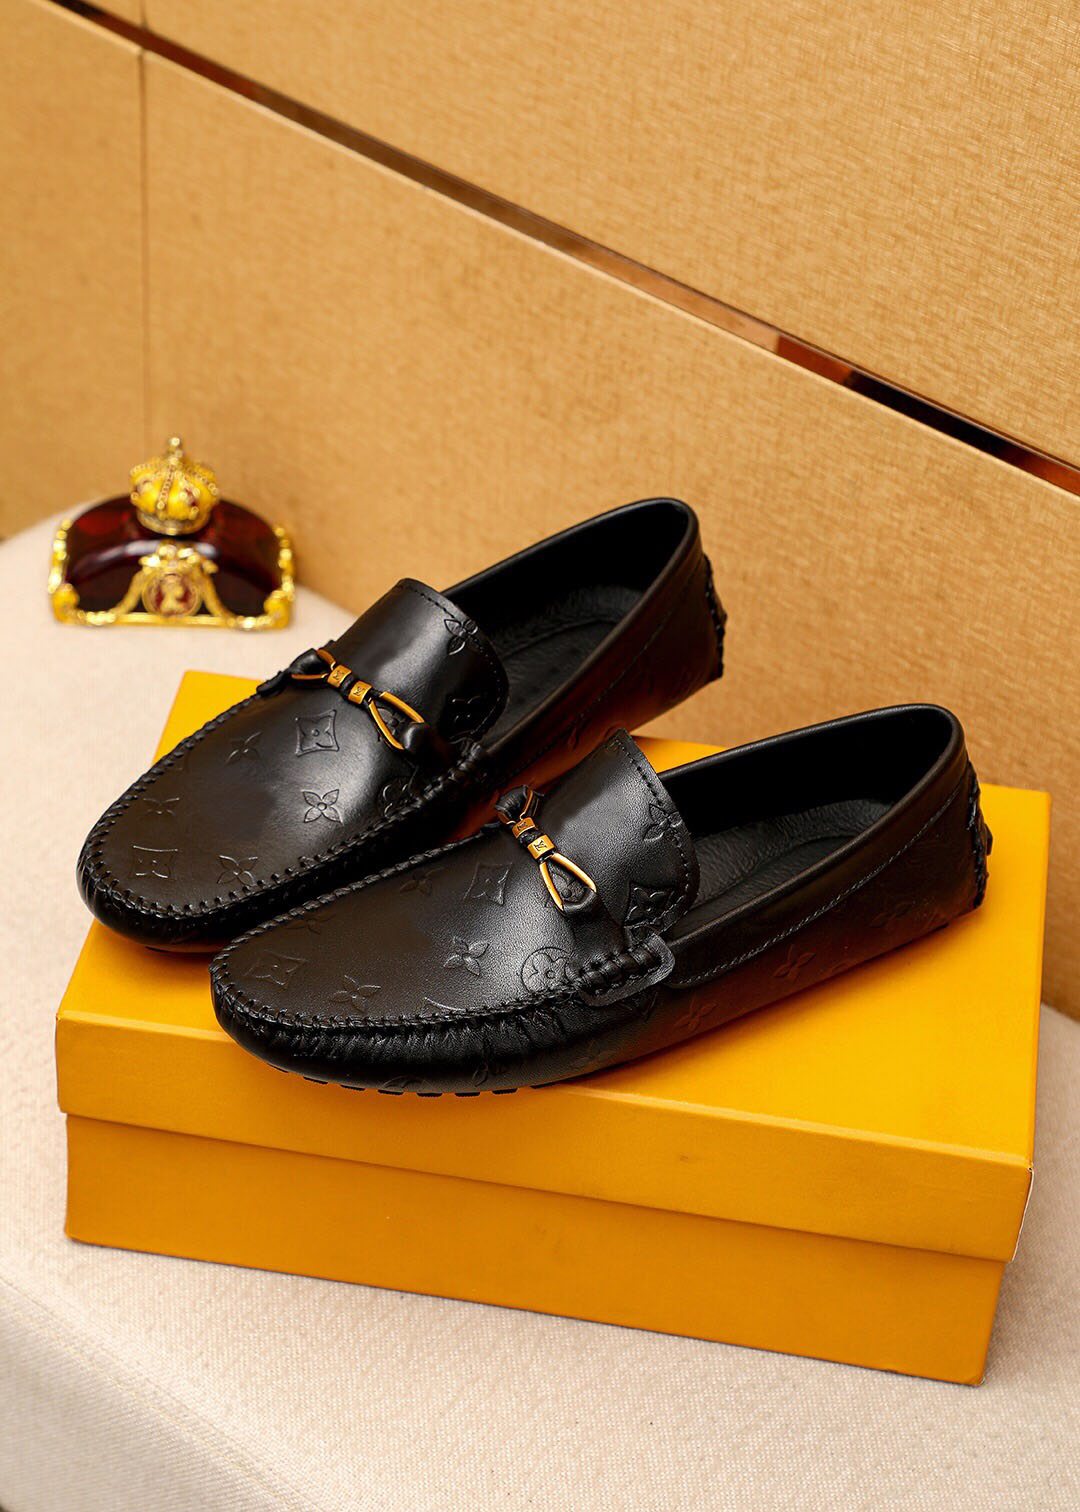 Mens Classic Designer Dress Shoes Casual Comfortable Business Flats Male Fashion Brand Princetown Loafers Size 37-47